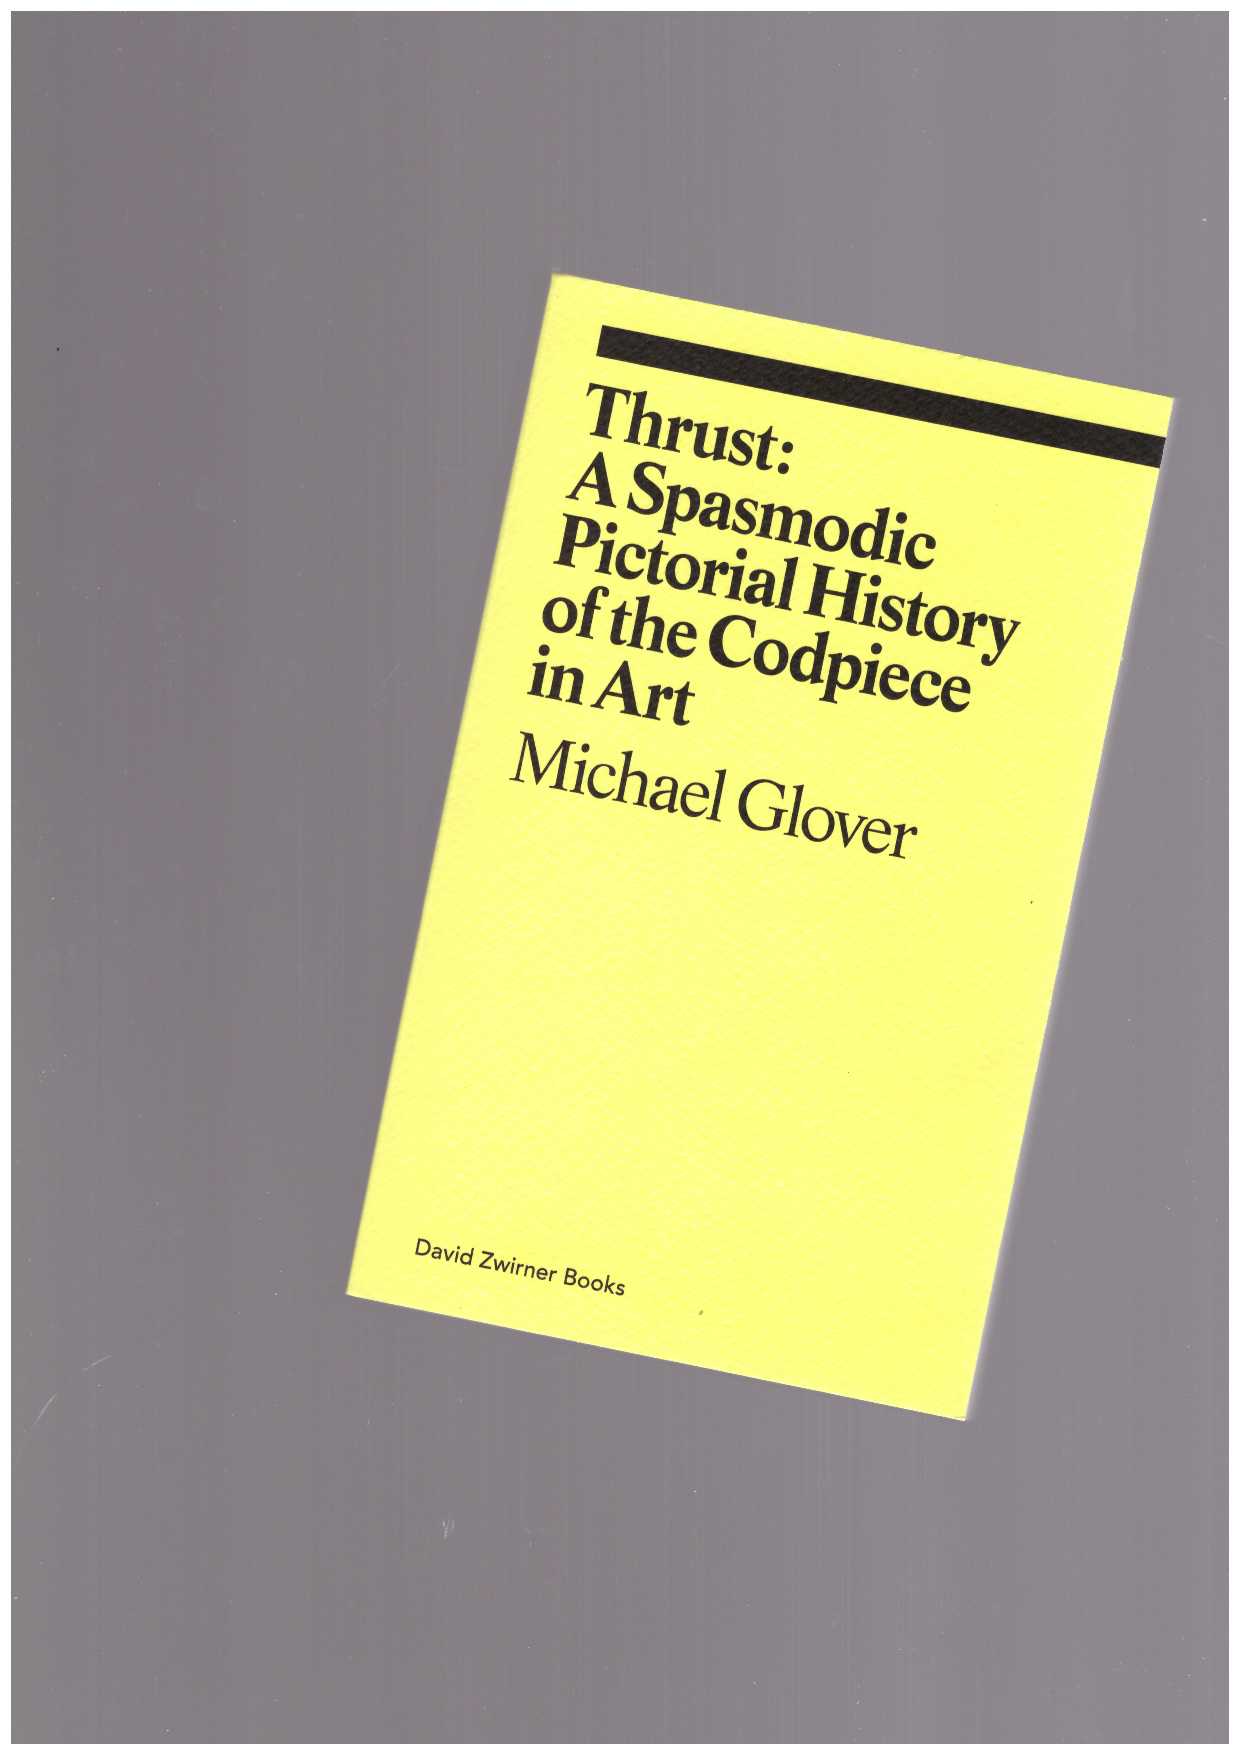 GLOVER, Michael - Thrust: a spasmodic pictorial history of the codpiece in art